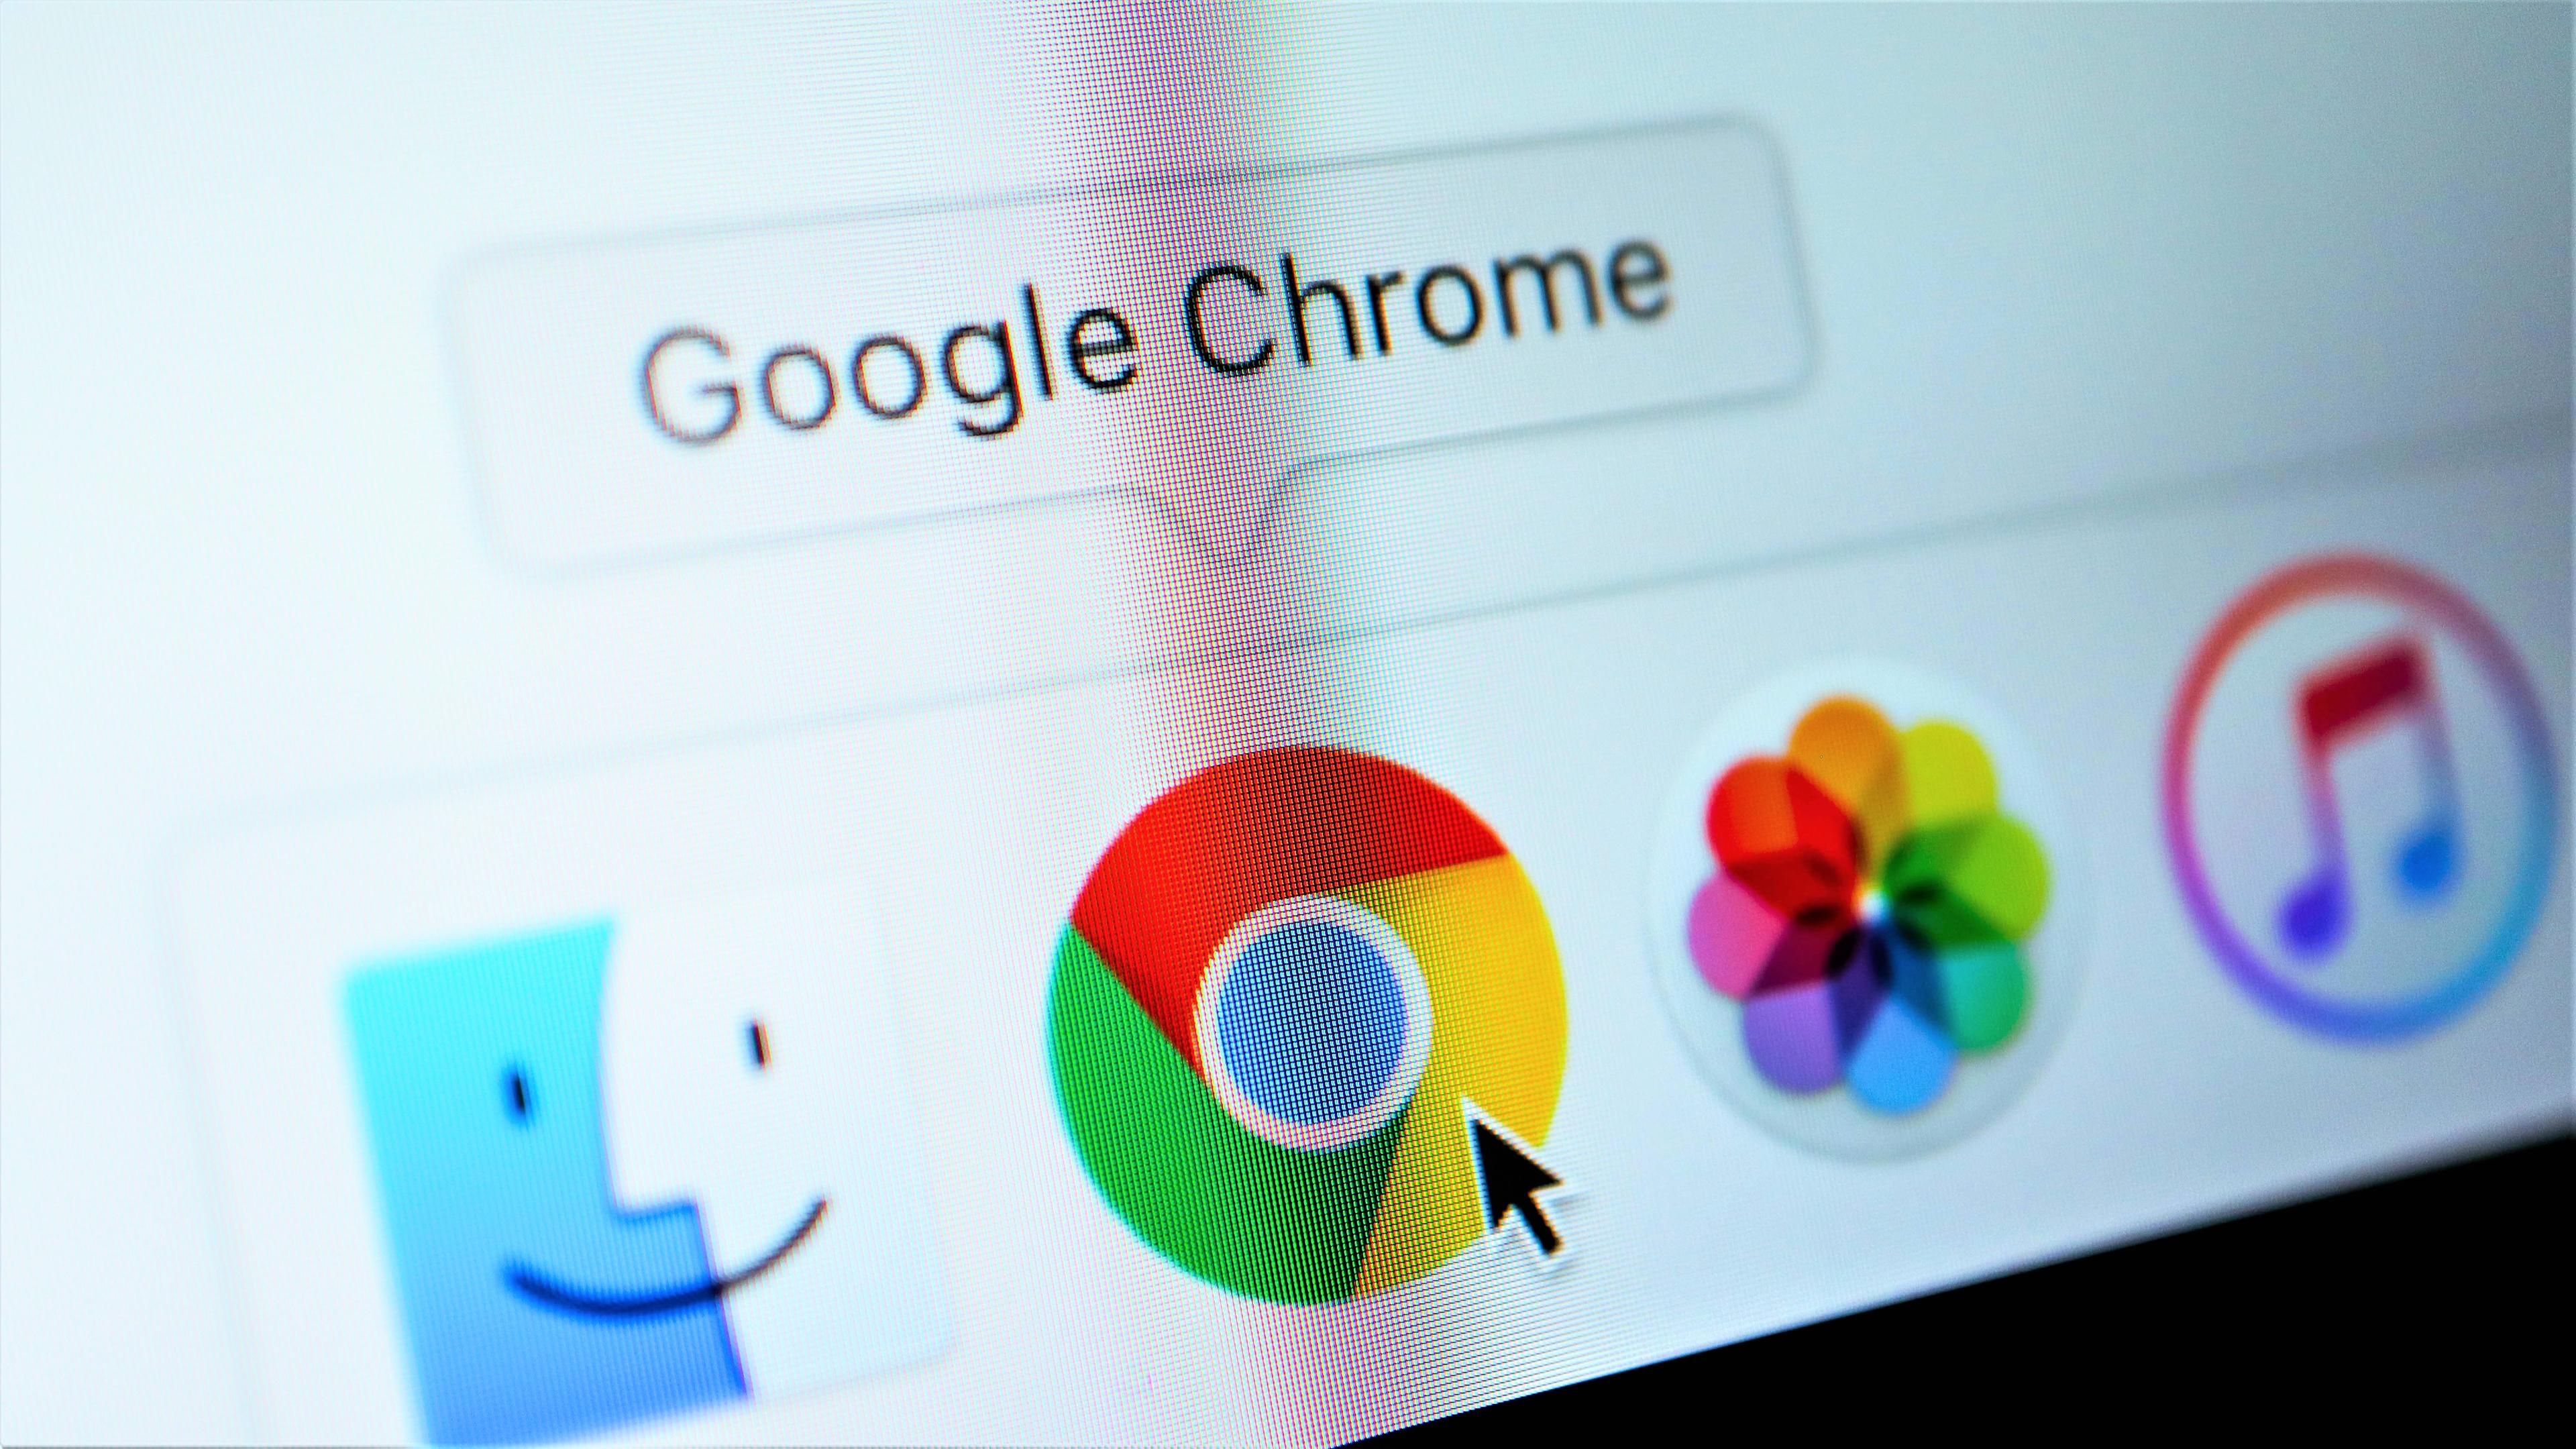 How to Build a Google Chrome Extension